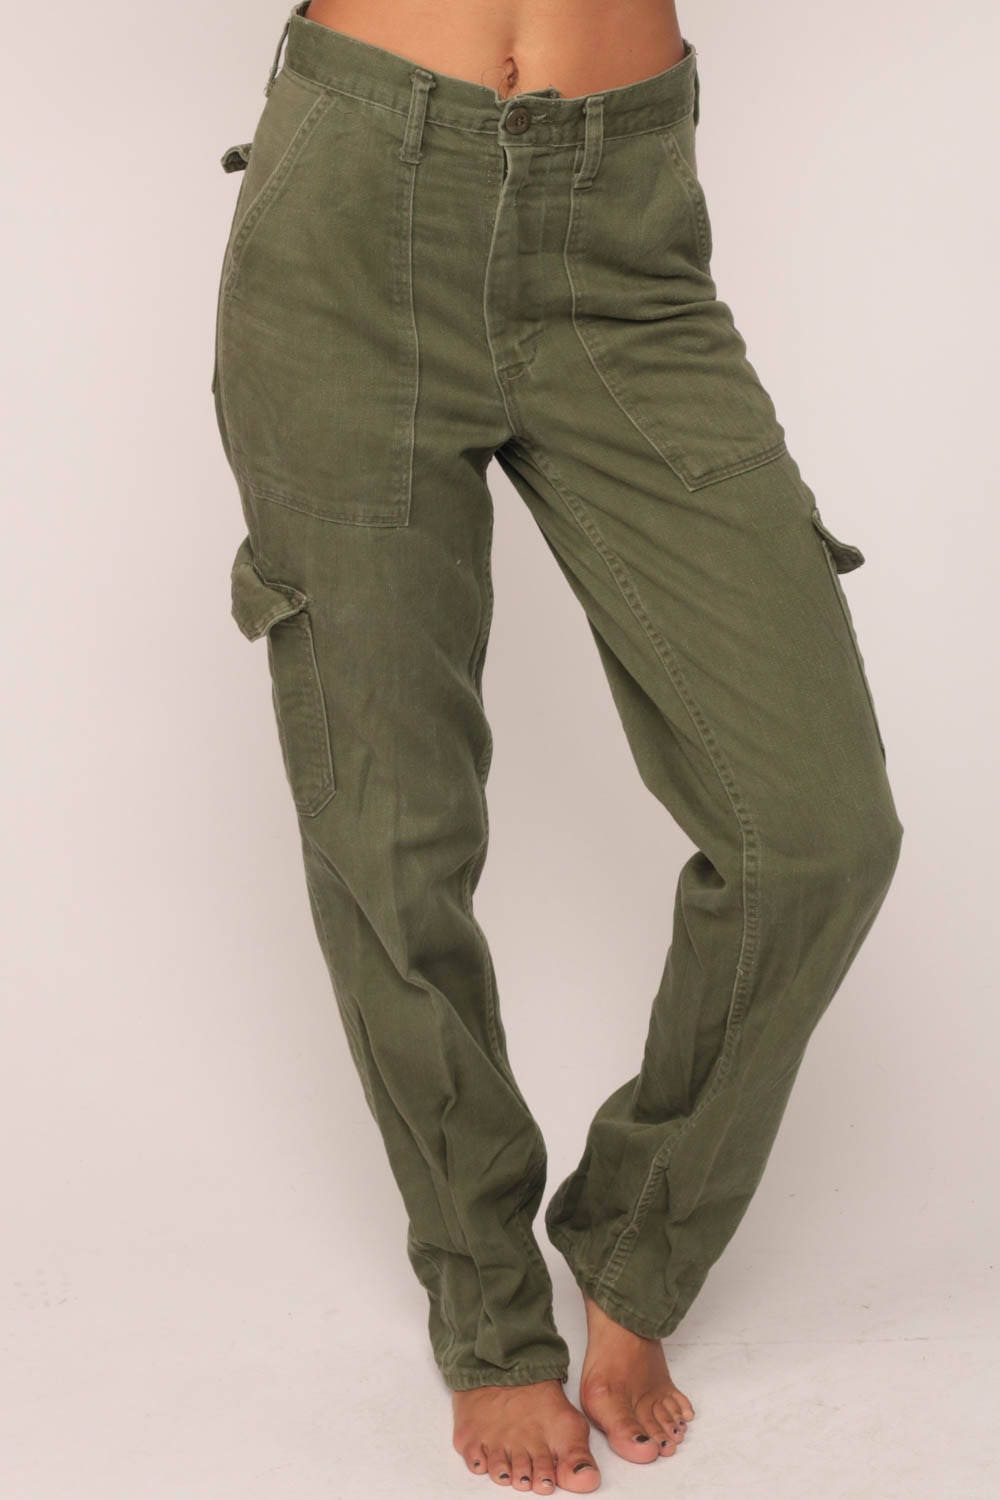 Army Pants CARGO Pants Military High Waisted Army pants, Pants, All